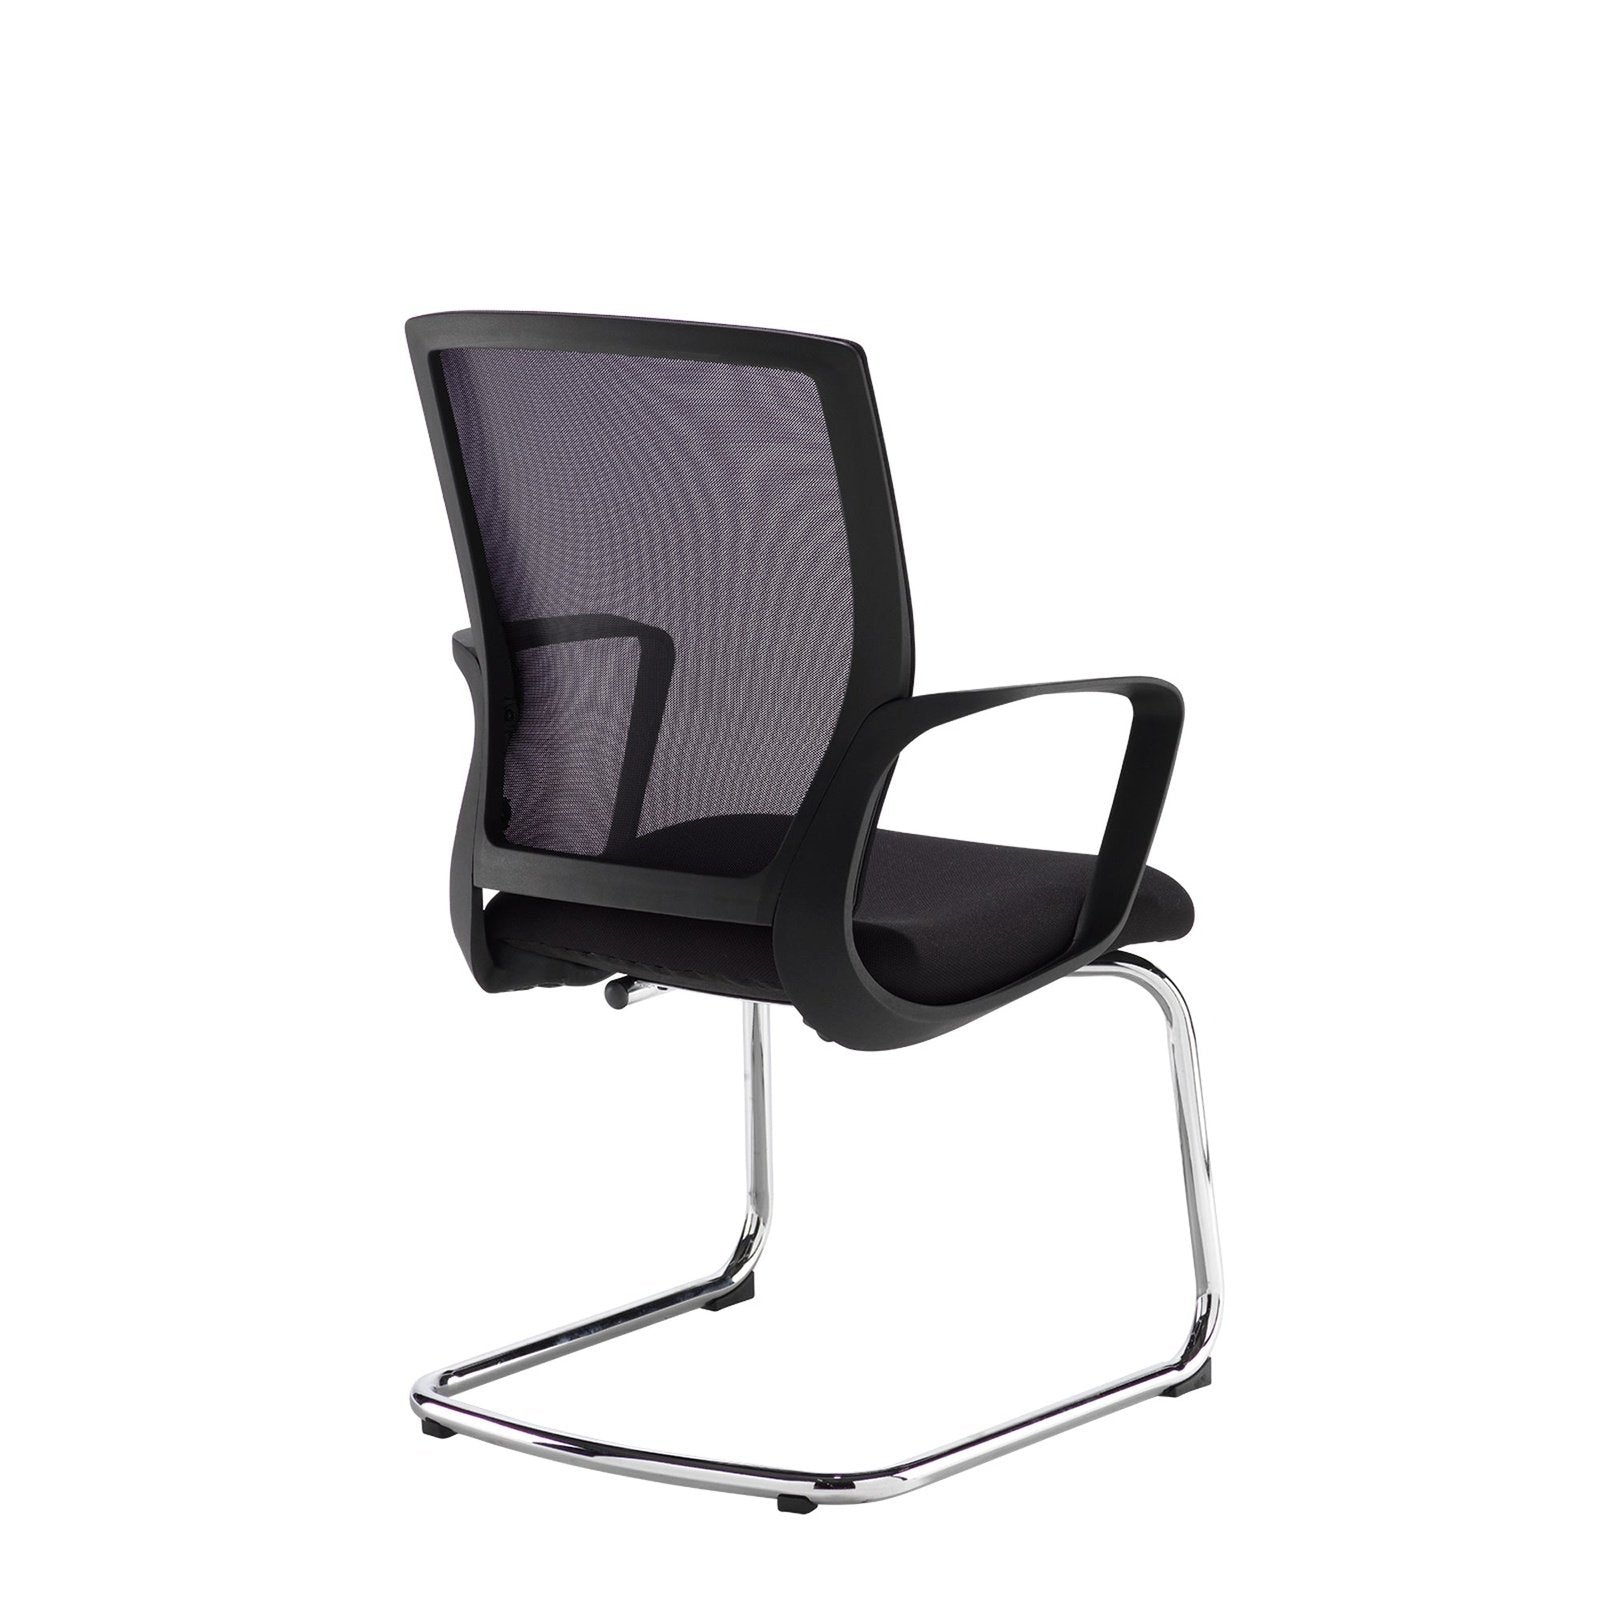 Jonas mesh back visitors chair with black fabric seat and chrome cantilever frame - Office Products Online